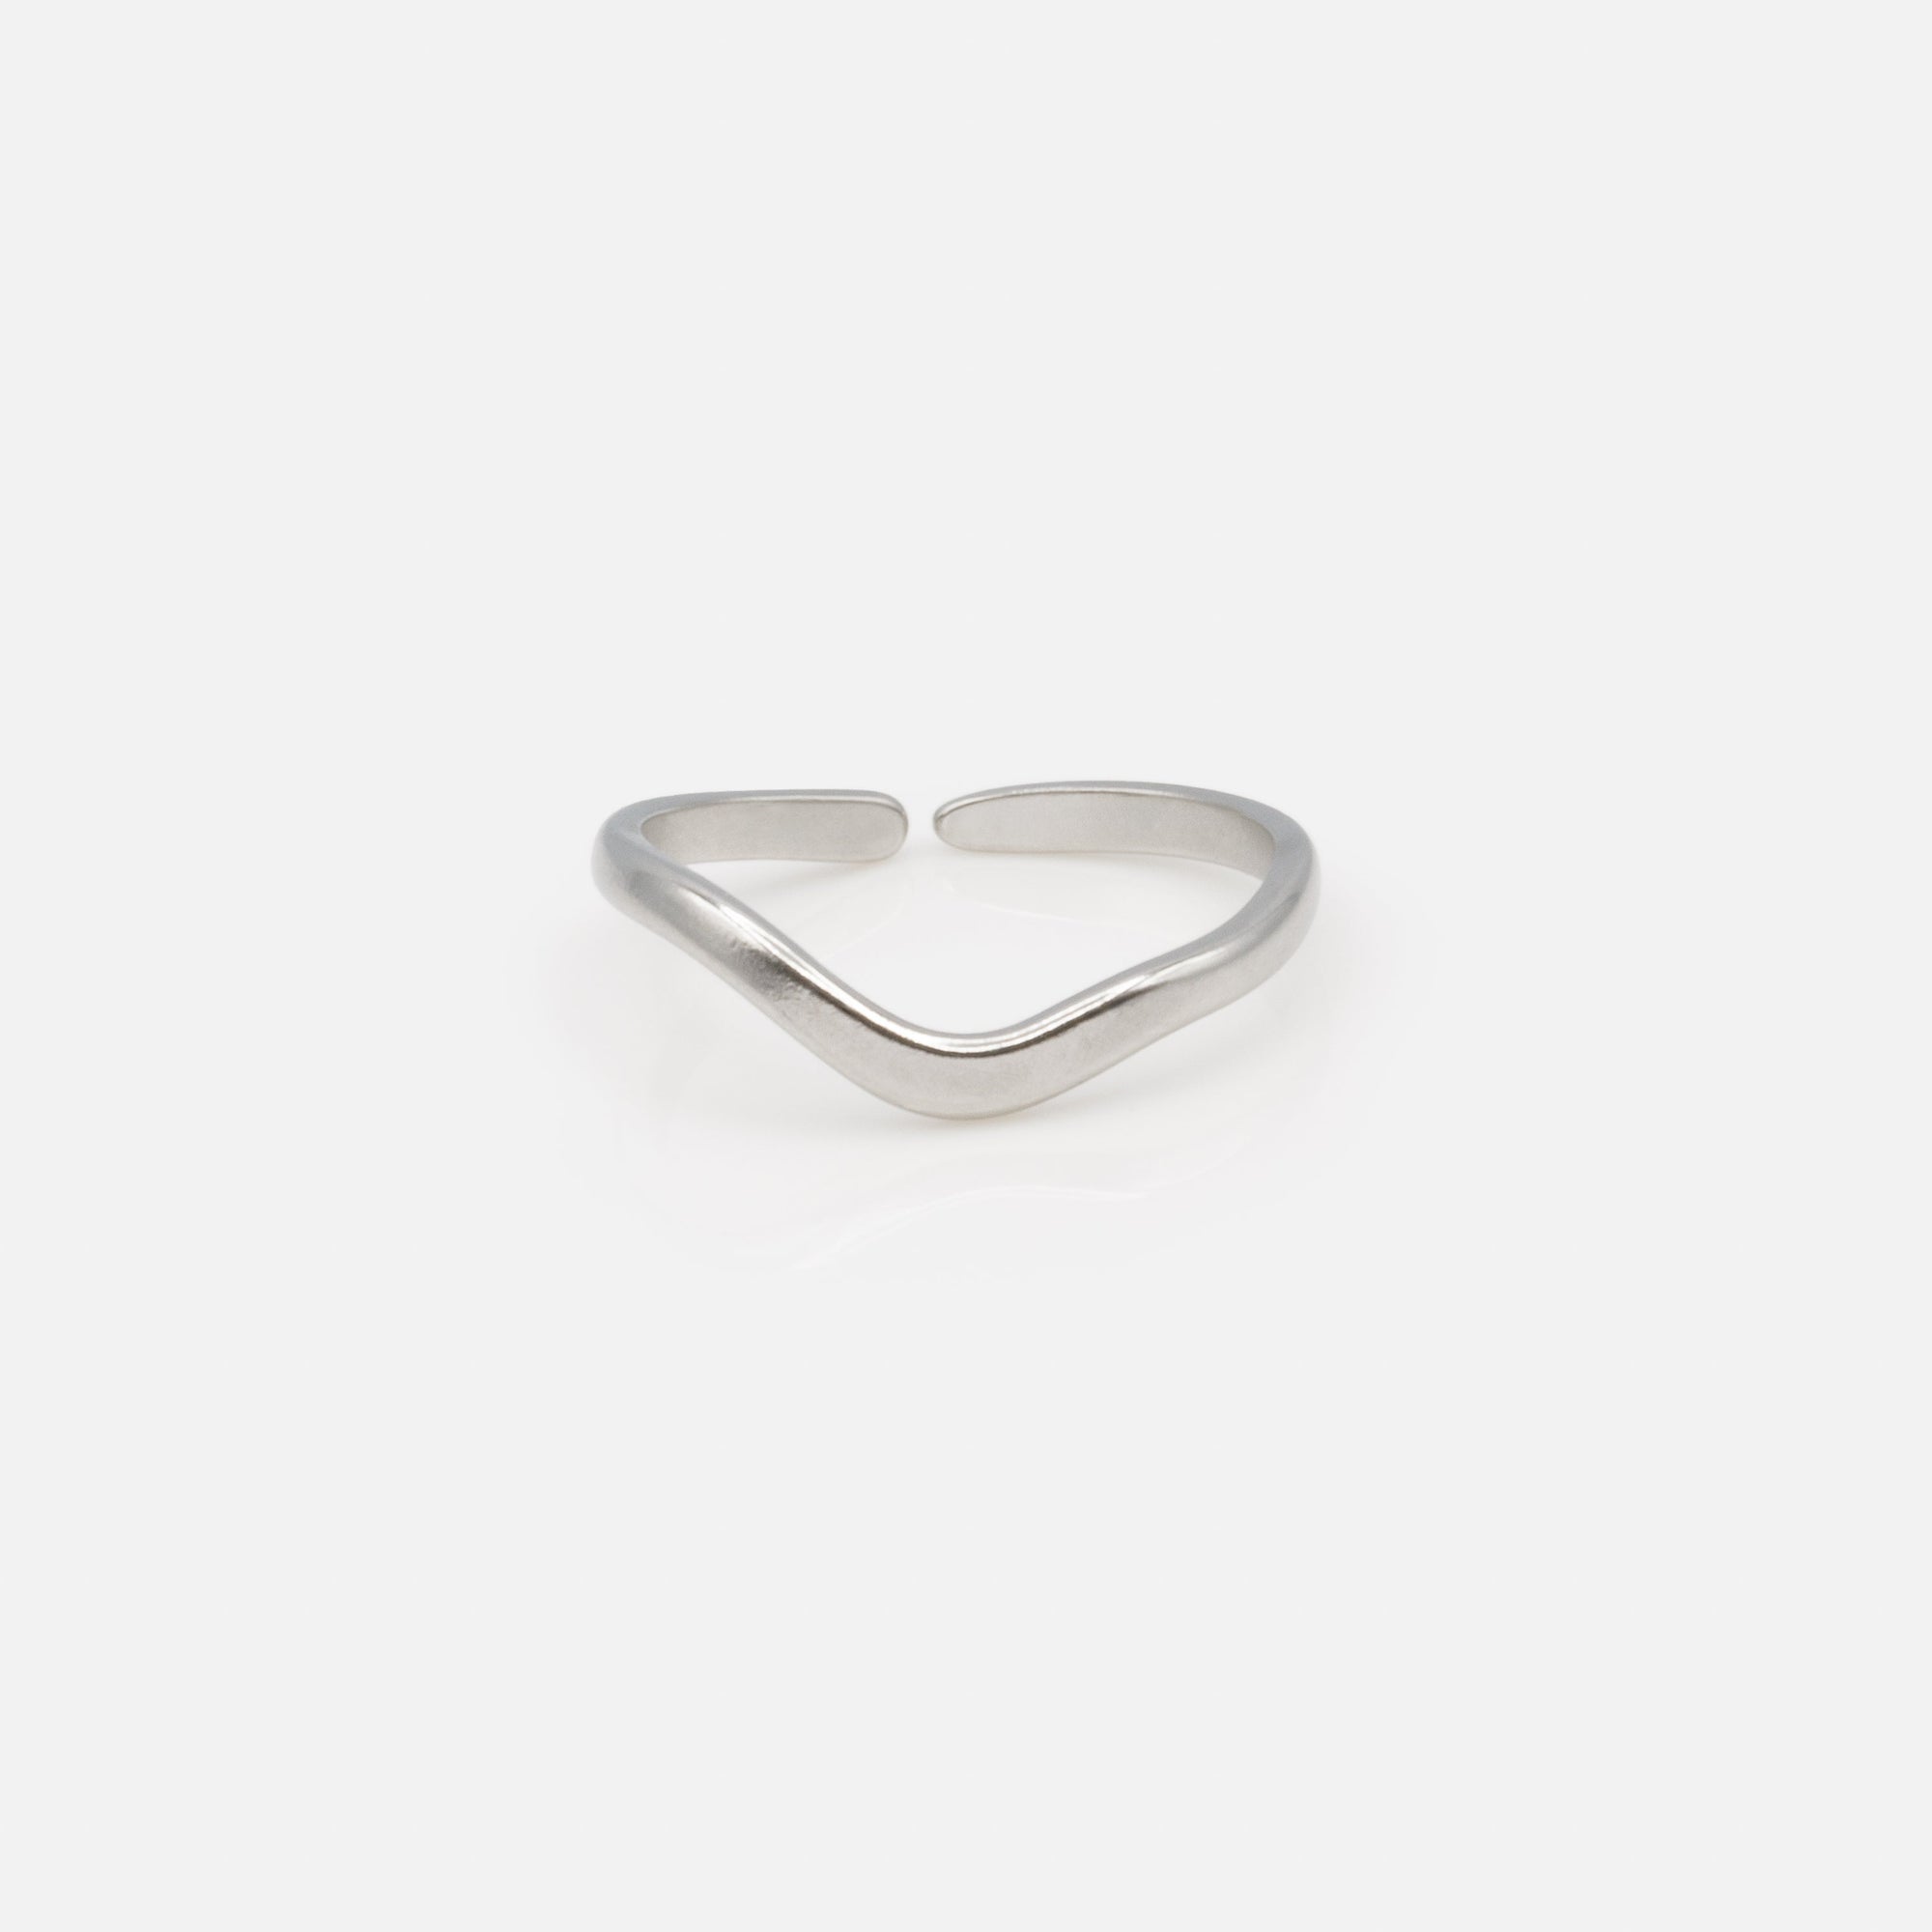 Silver wavy ring in stainless steel